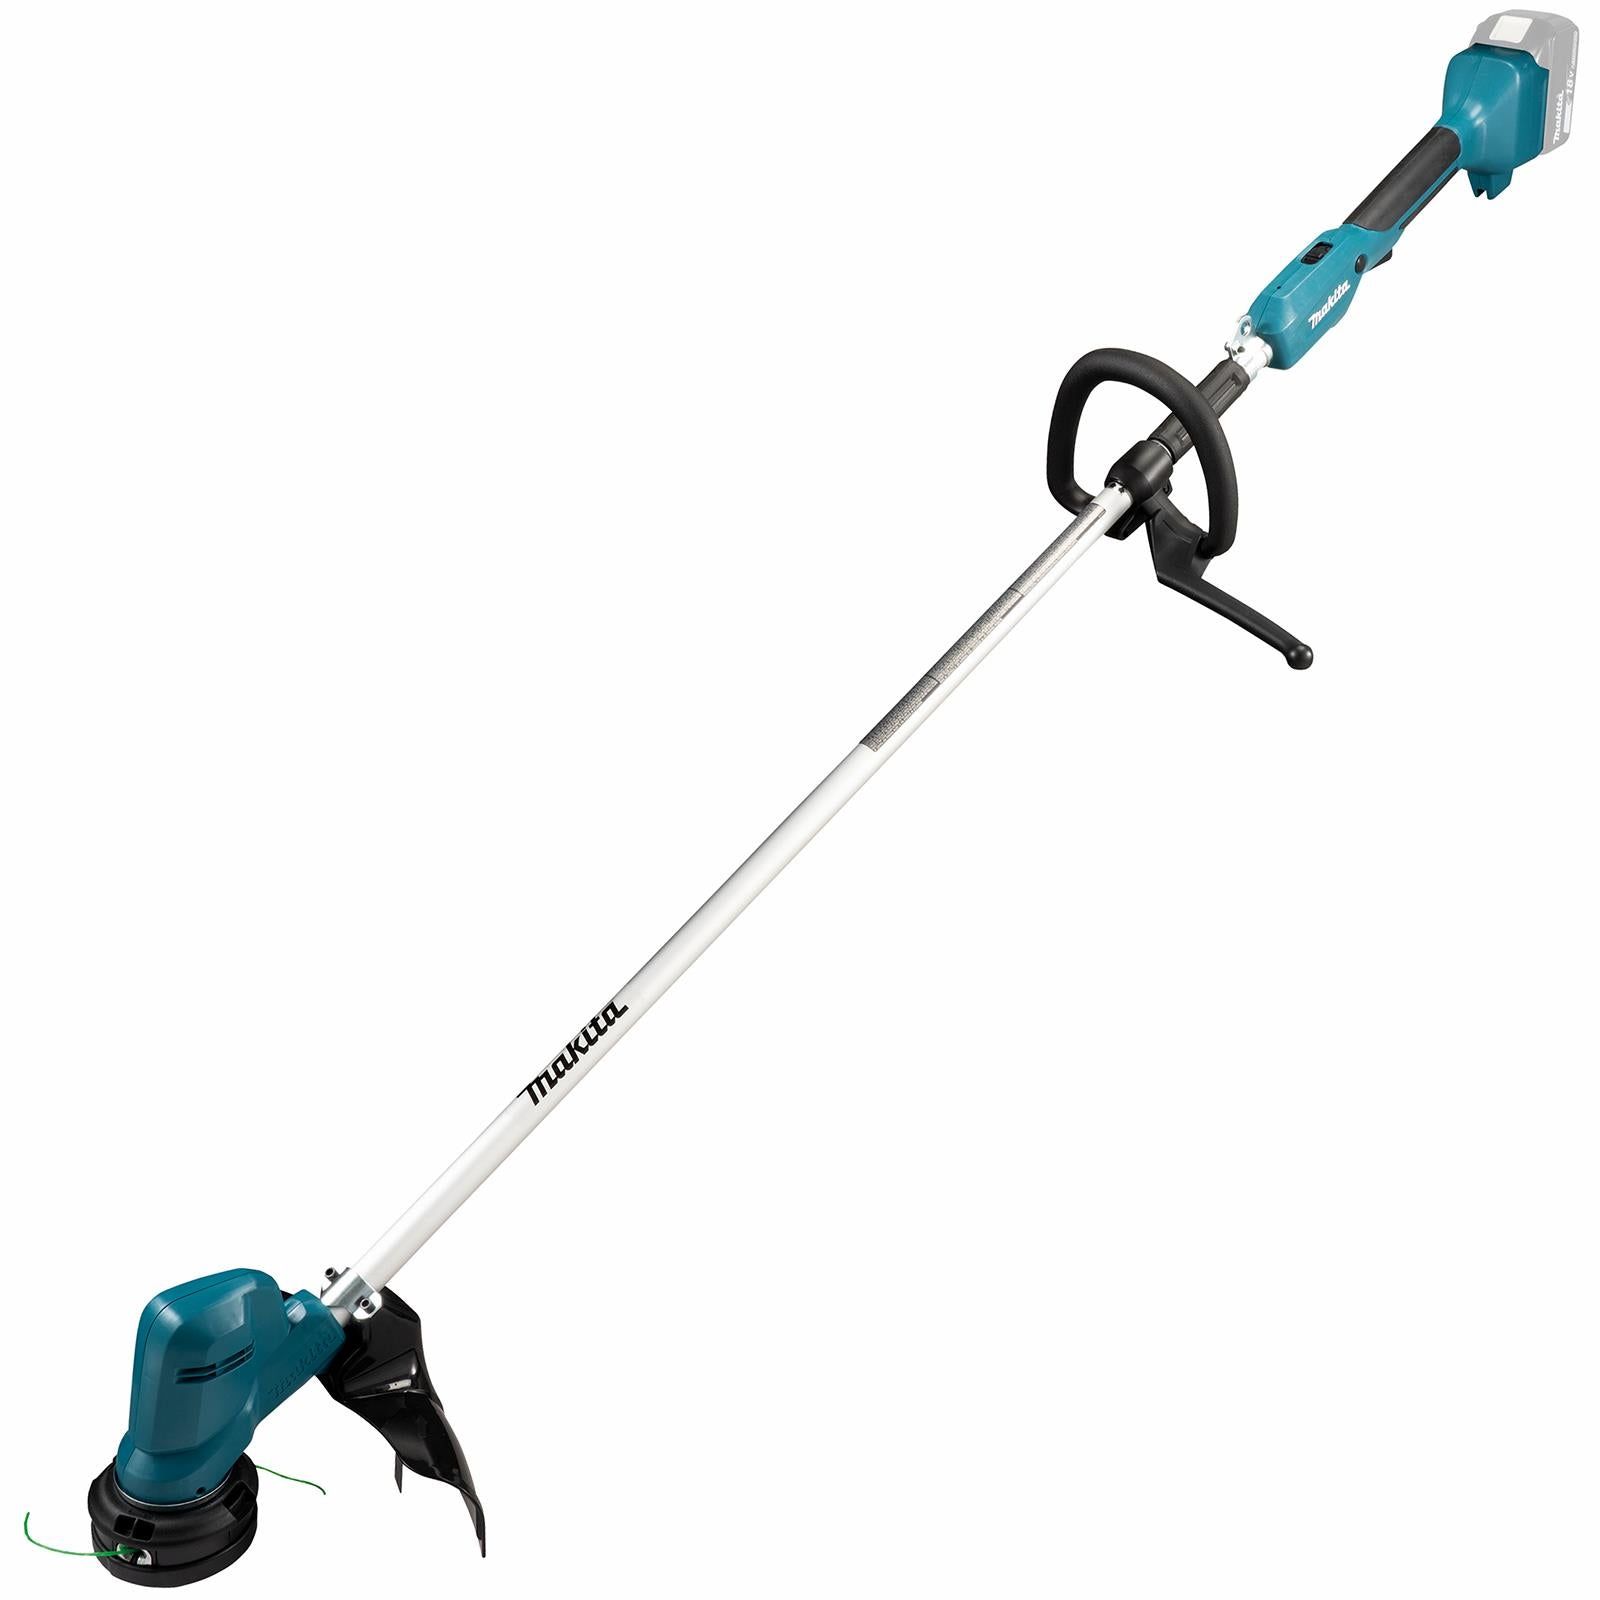 Makita Grass Trimmer Strimmer 18V LXT Brushless Cordless Garden Lawn Strimming Bare Unit Body Only DUR194ZX3